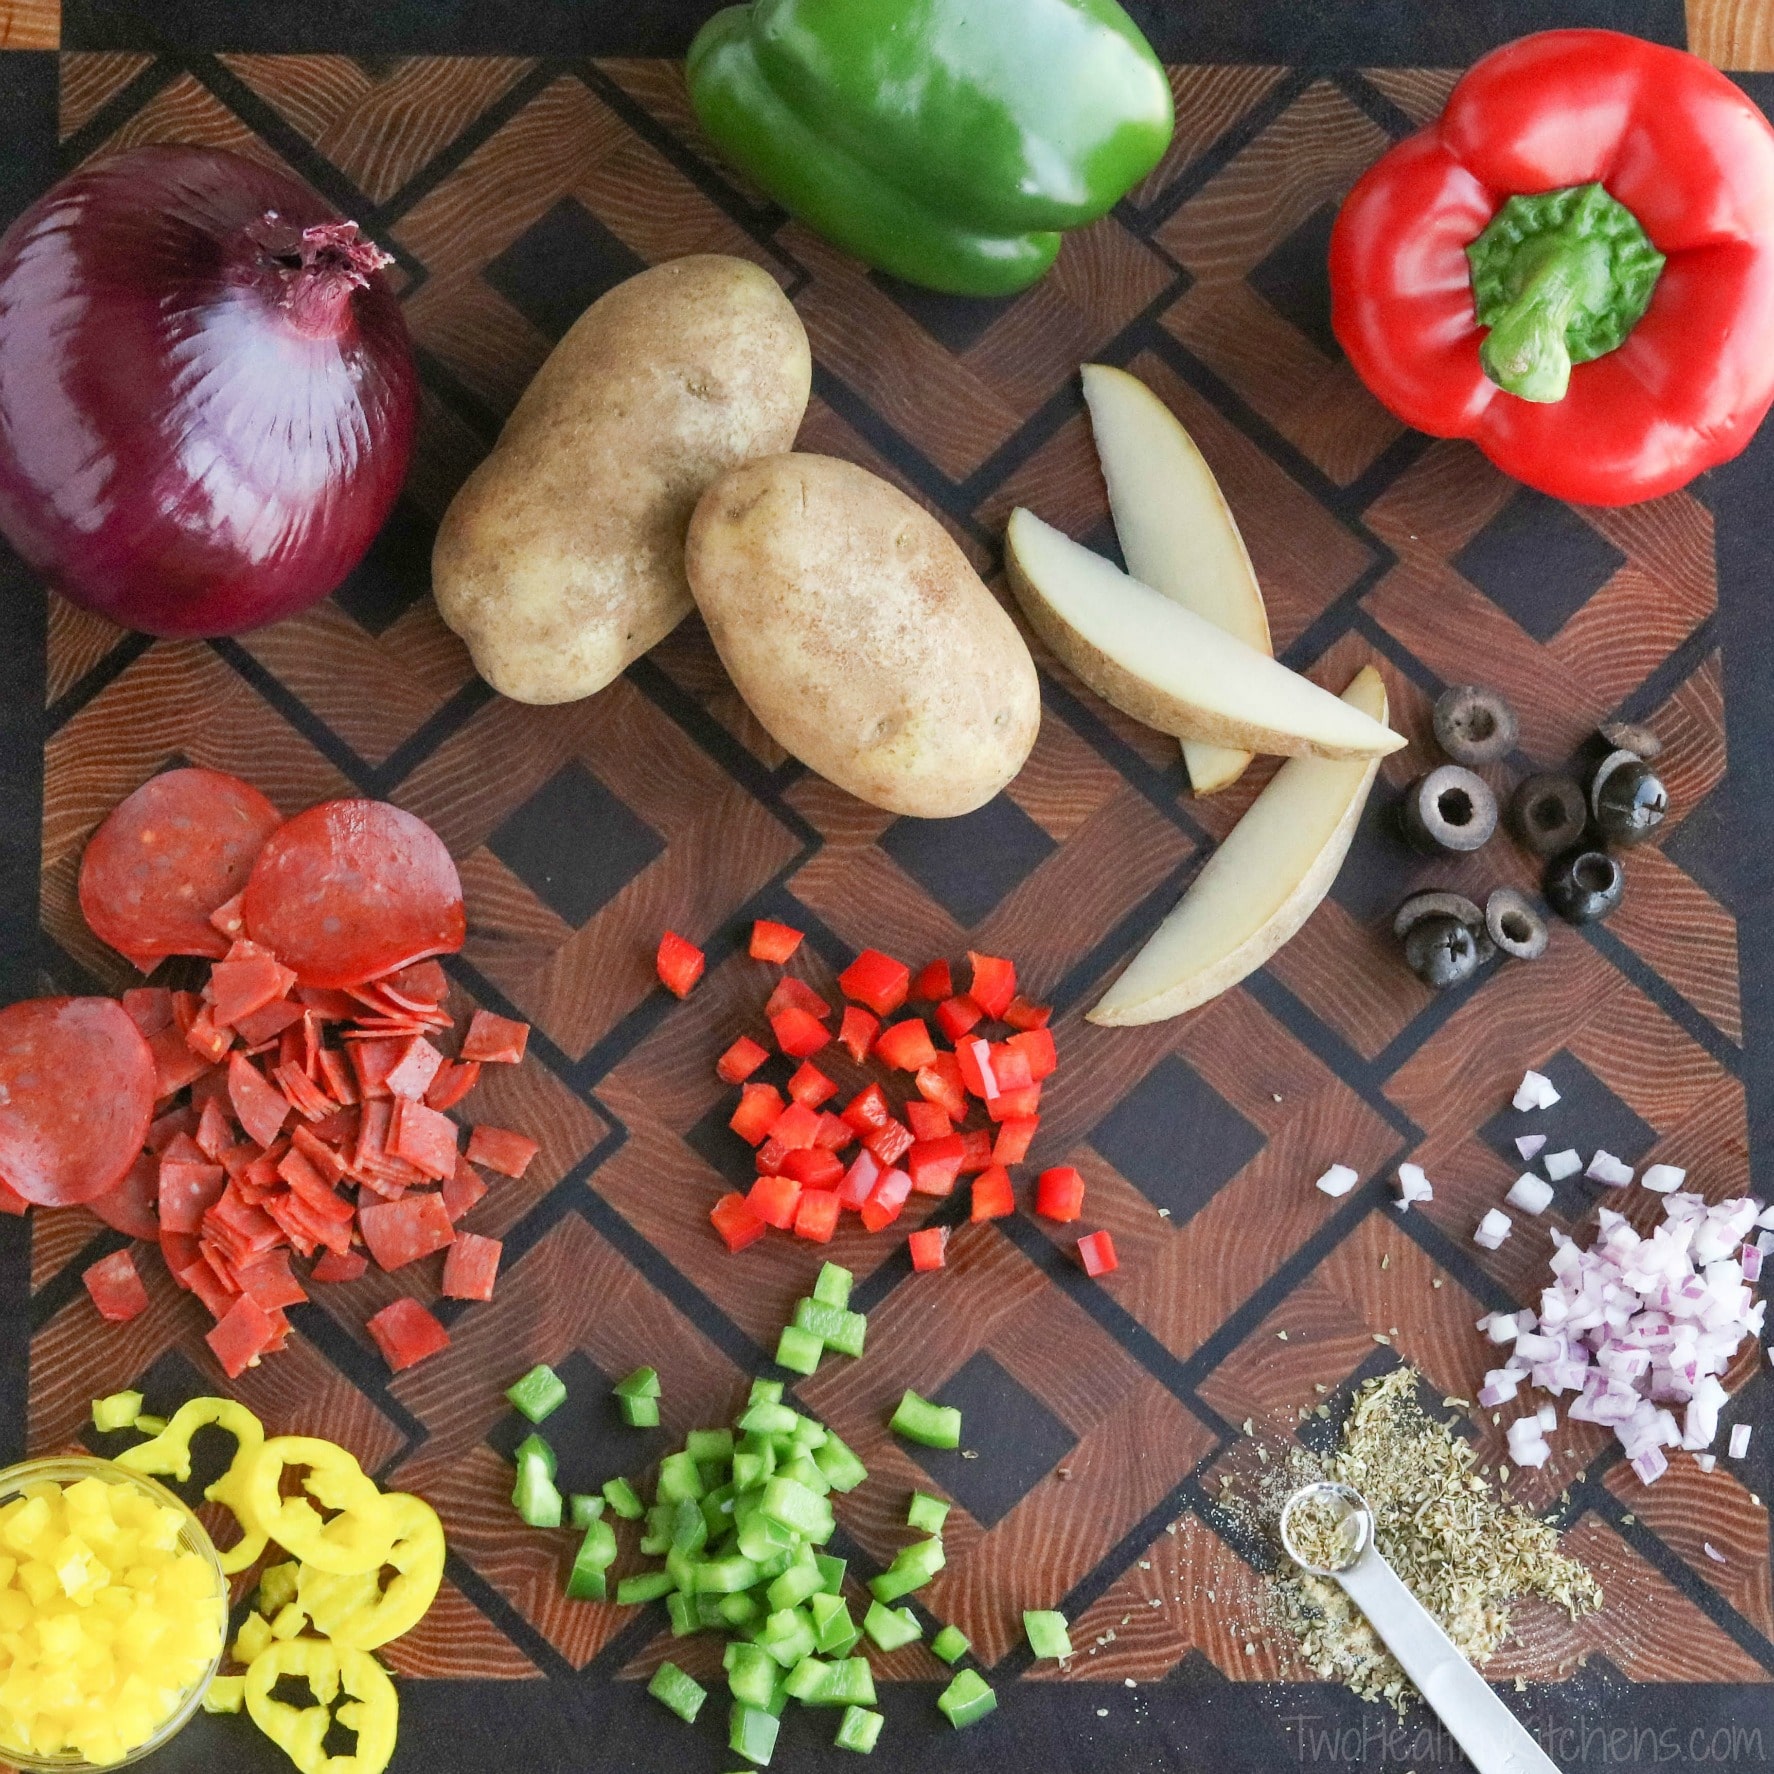 Flatlay of ingredients (whole and chopped) on wooden, square-patterned cutting board.